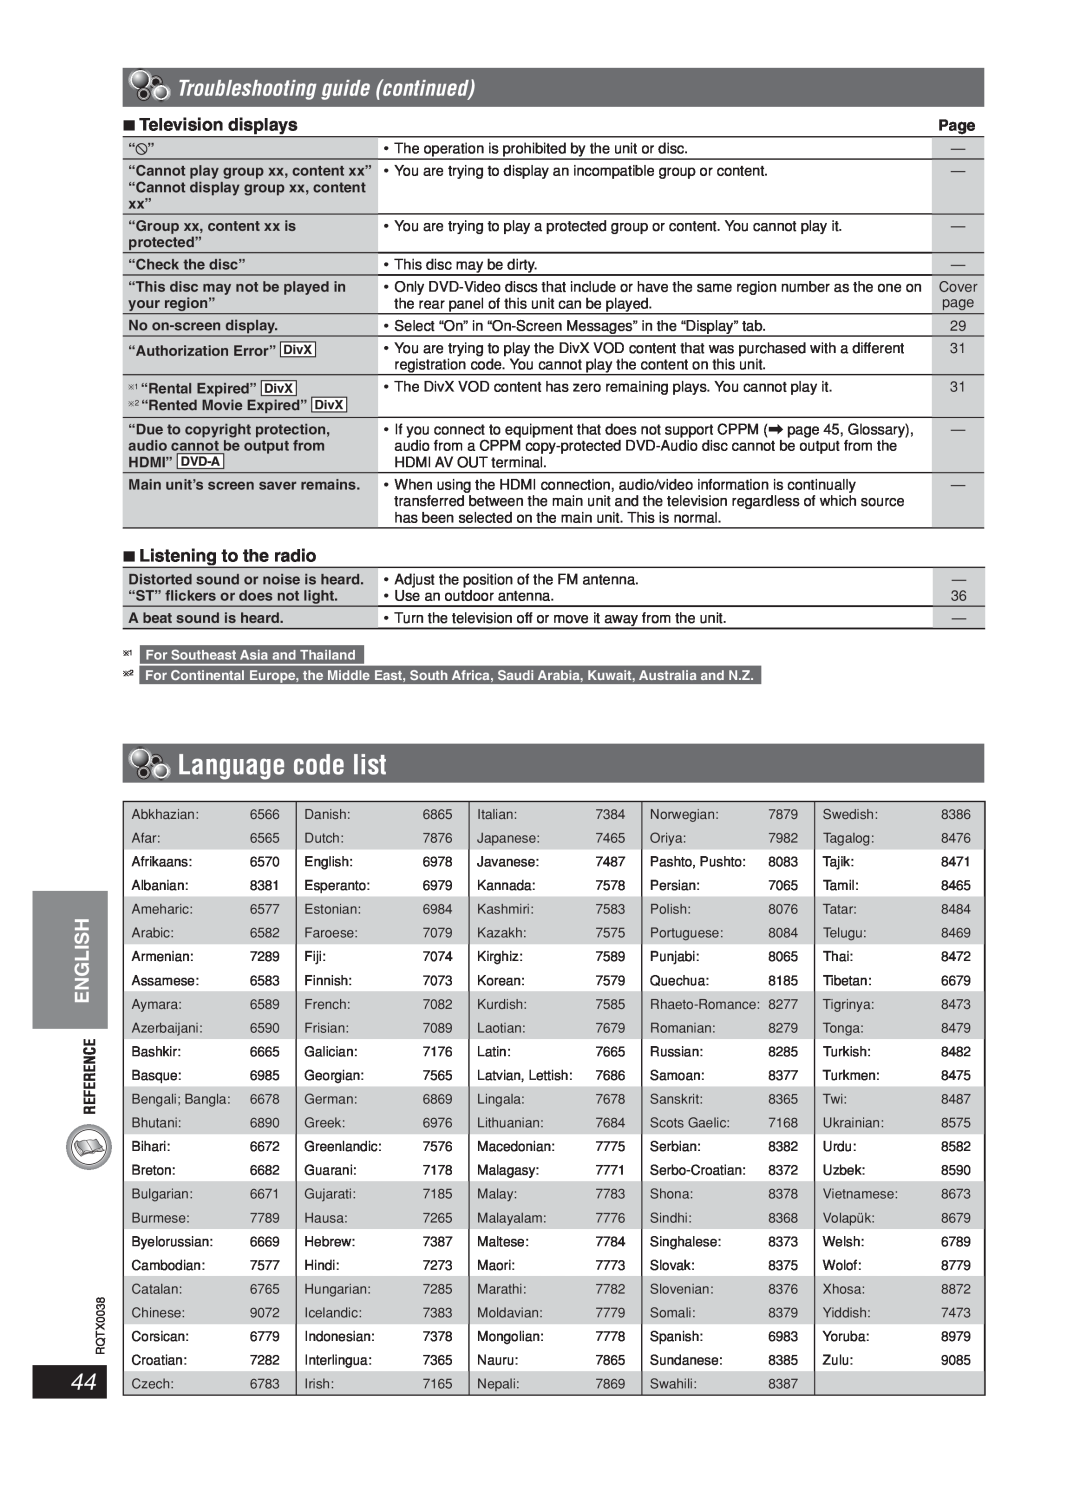 Panasonic SC-PT850 manual Language code list, Television displays, 7Listening to the radio, Troubleshooting guide continued 